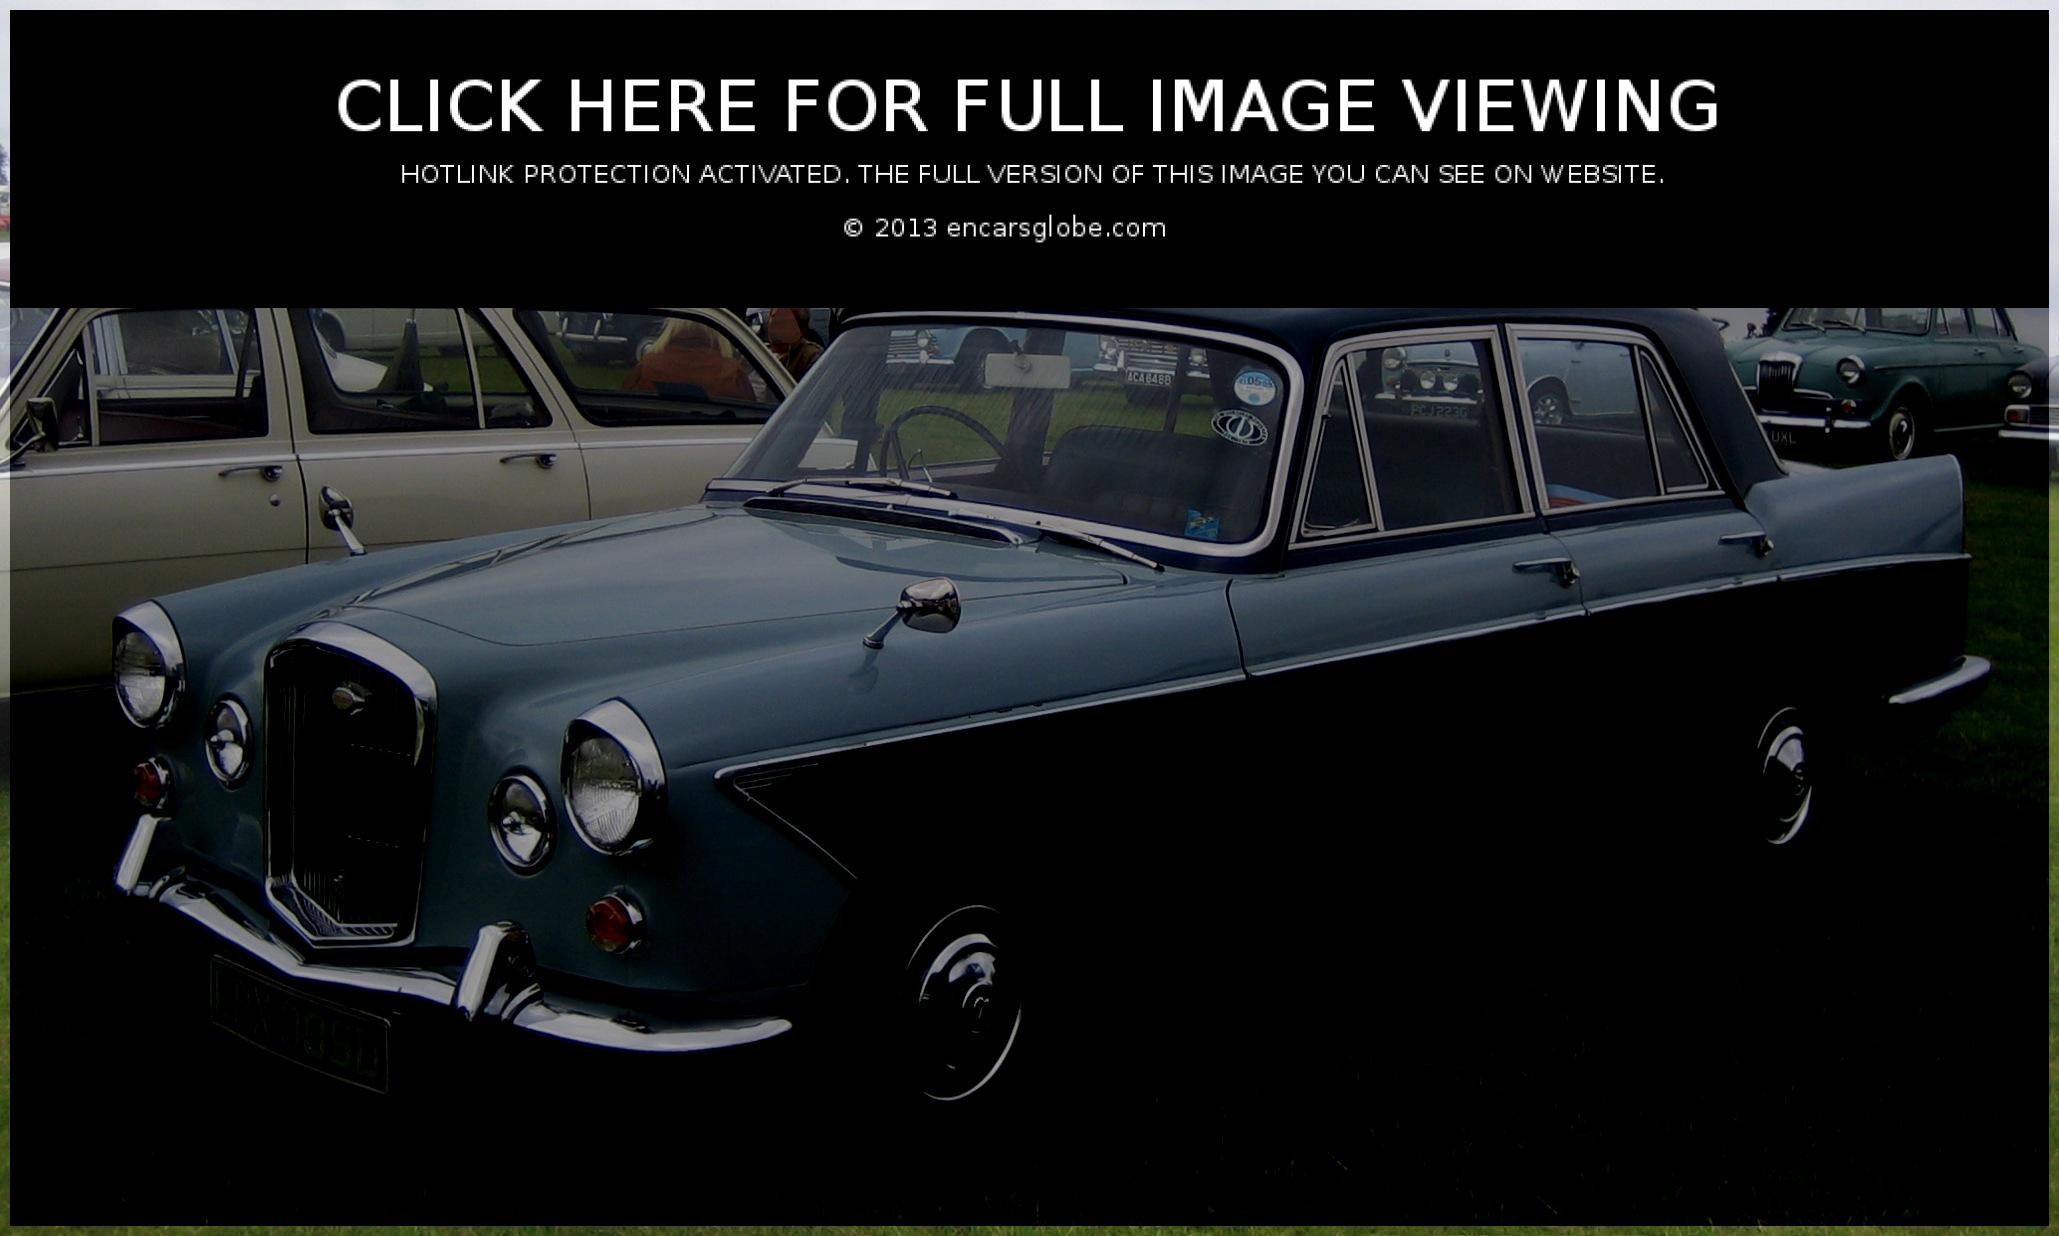 Wolseley 1660 saloon Photo Gallery: Photo #10 out of 9, Image Size ...